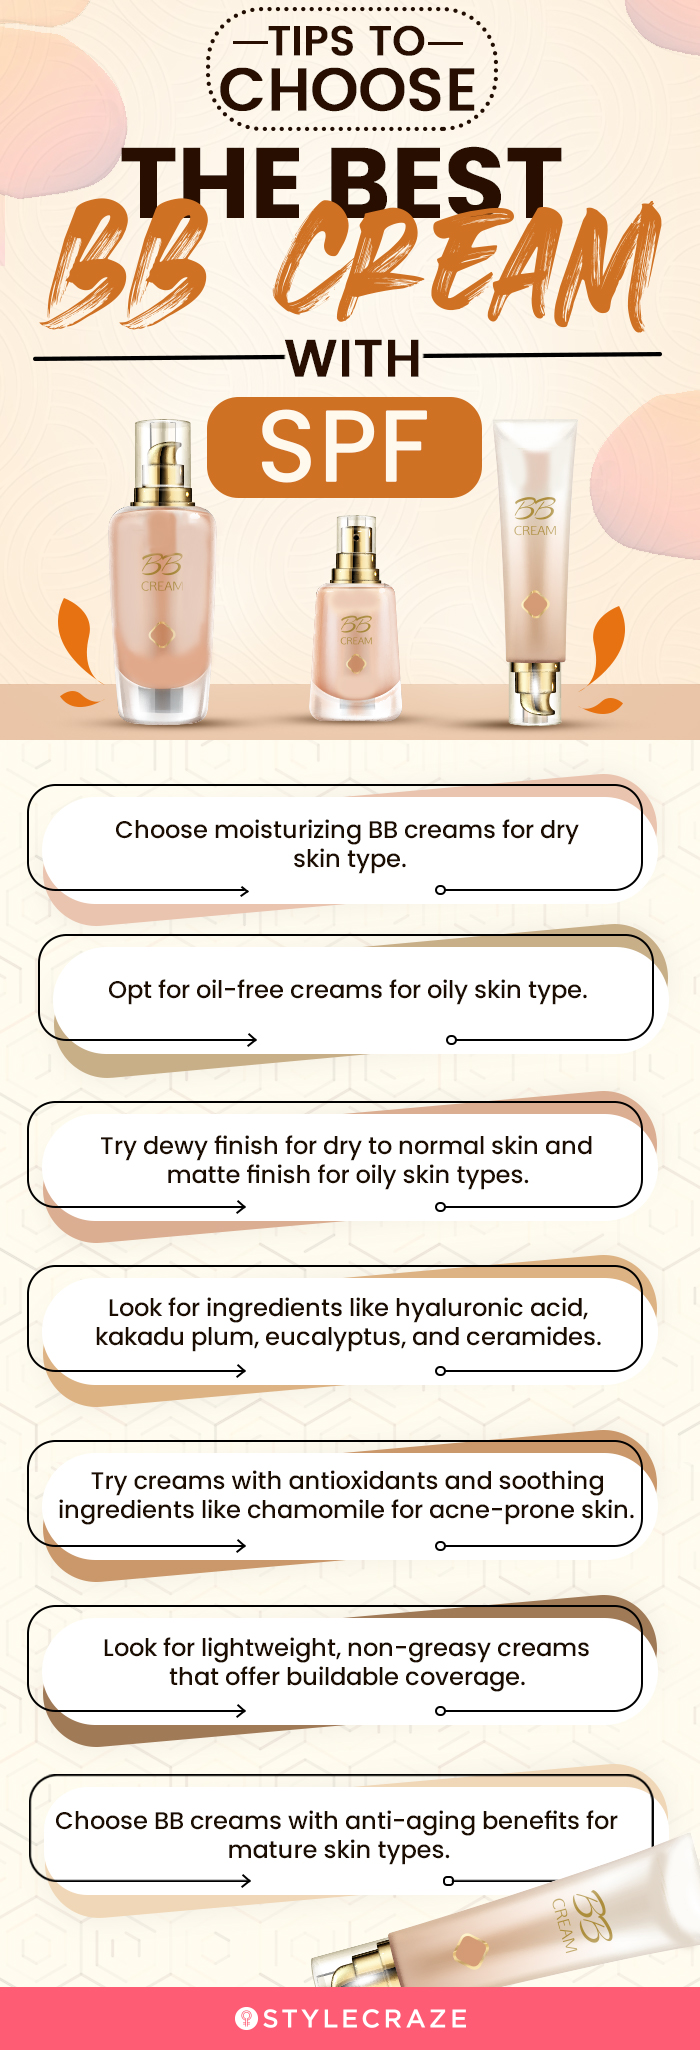 Tips To Choose The Best BB Creams